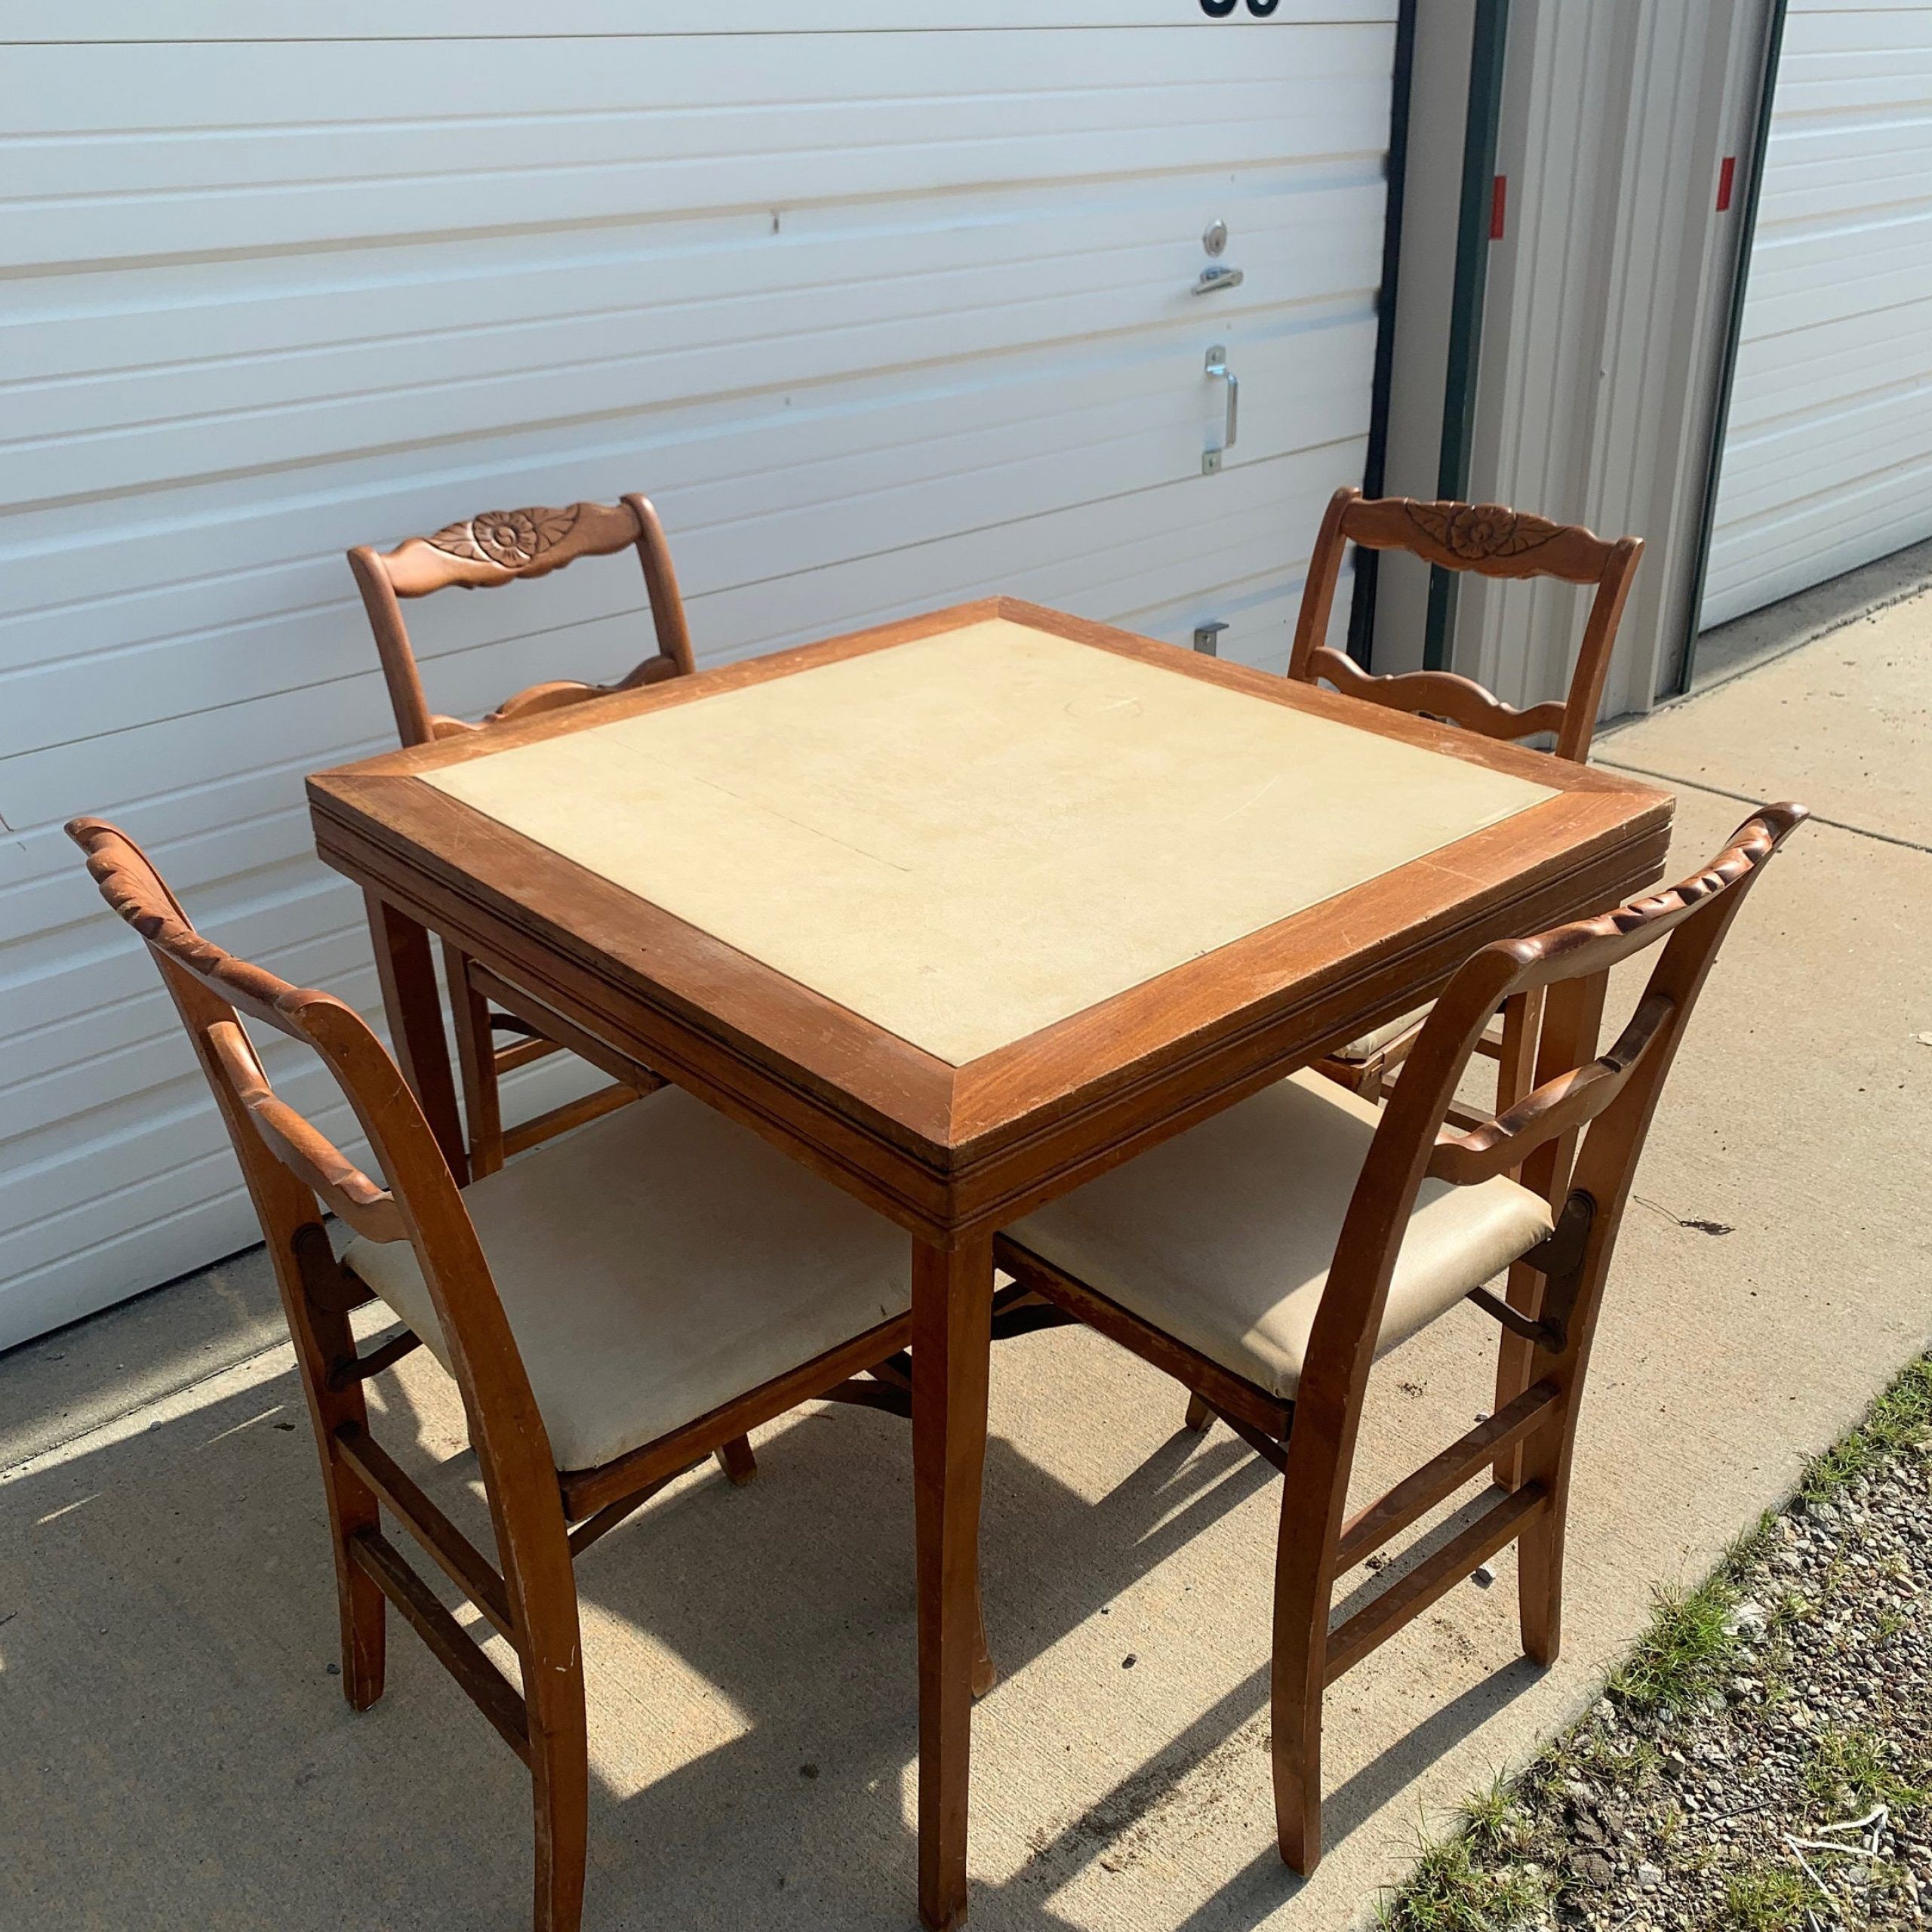 Most Popular Wood Bistro Table And Chairs Sets Throughout 5pc Vintage Game Card Table Chairs Dining Wood Dinette Kitchen Bistro (View 7 of 15)